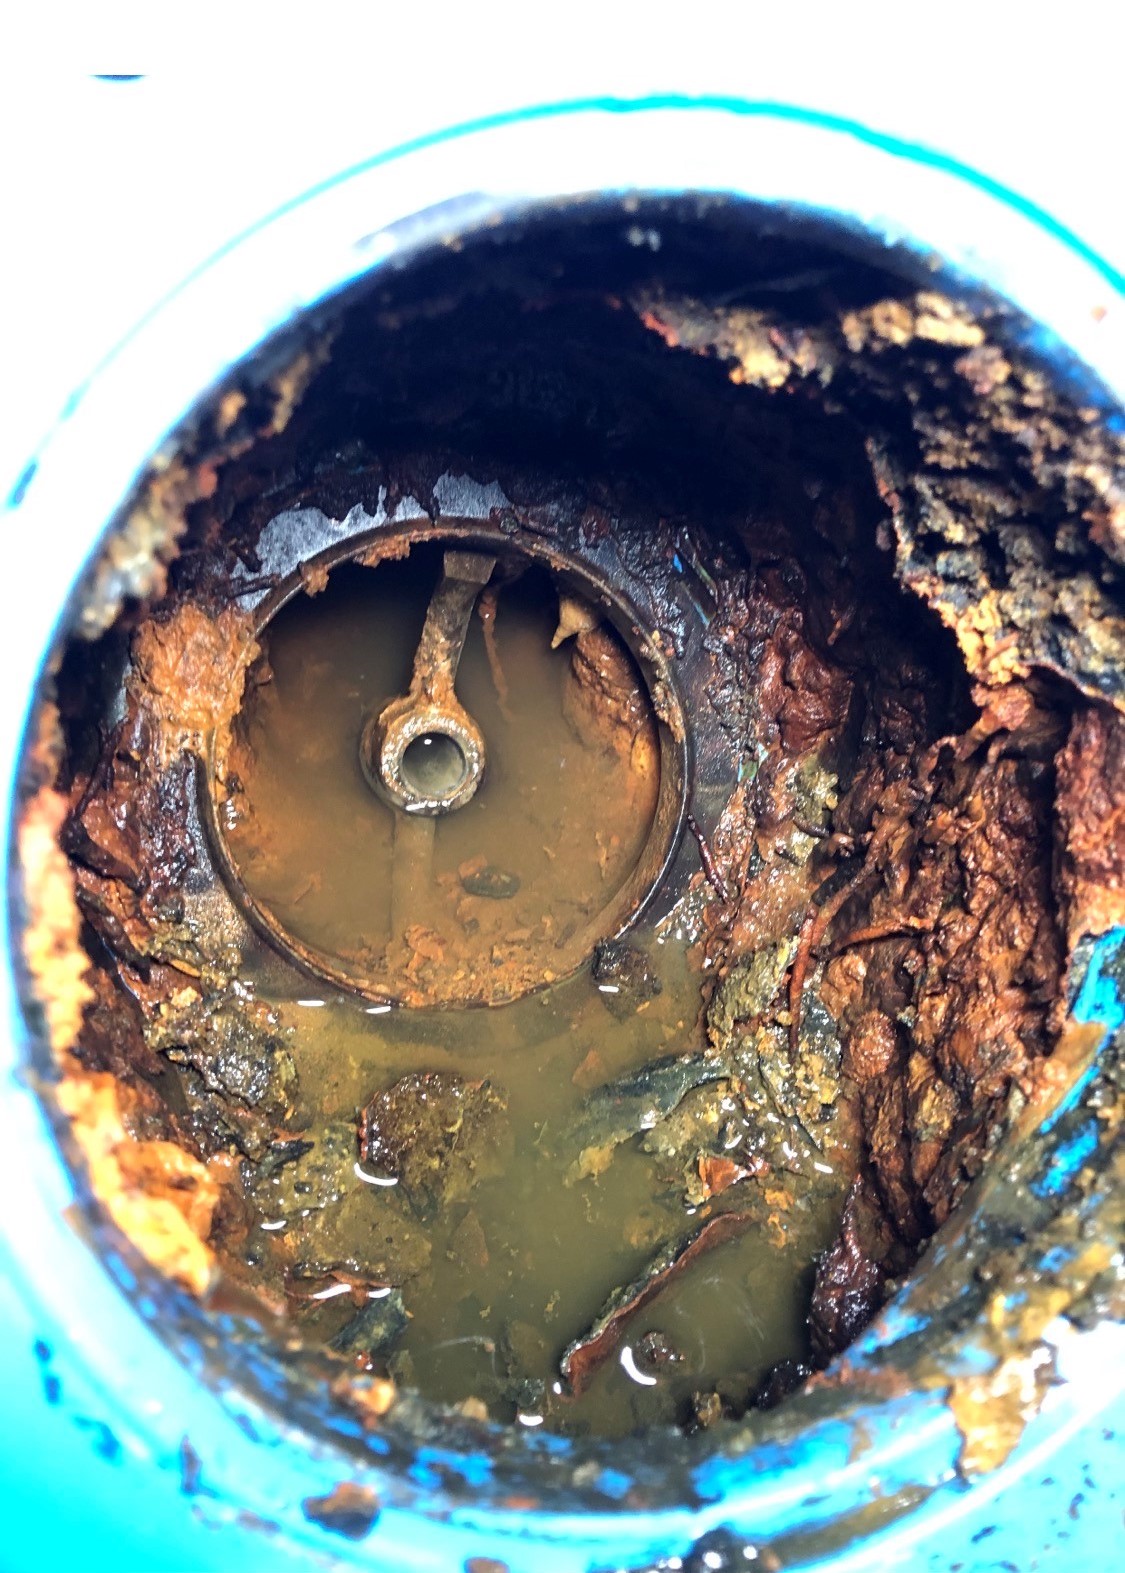 A backflow device in serious need of maintenance